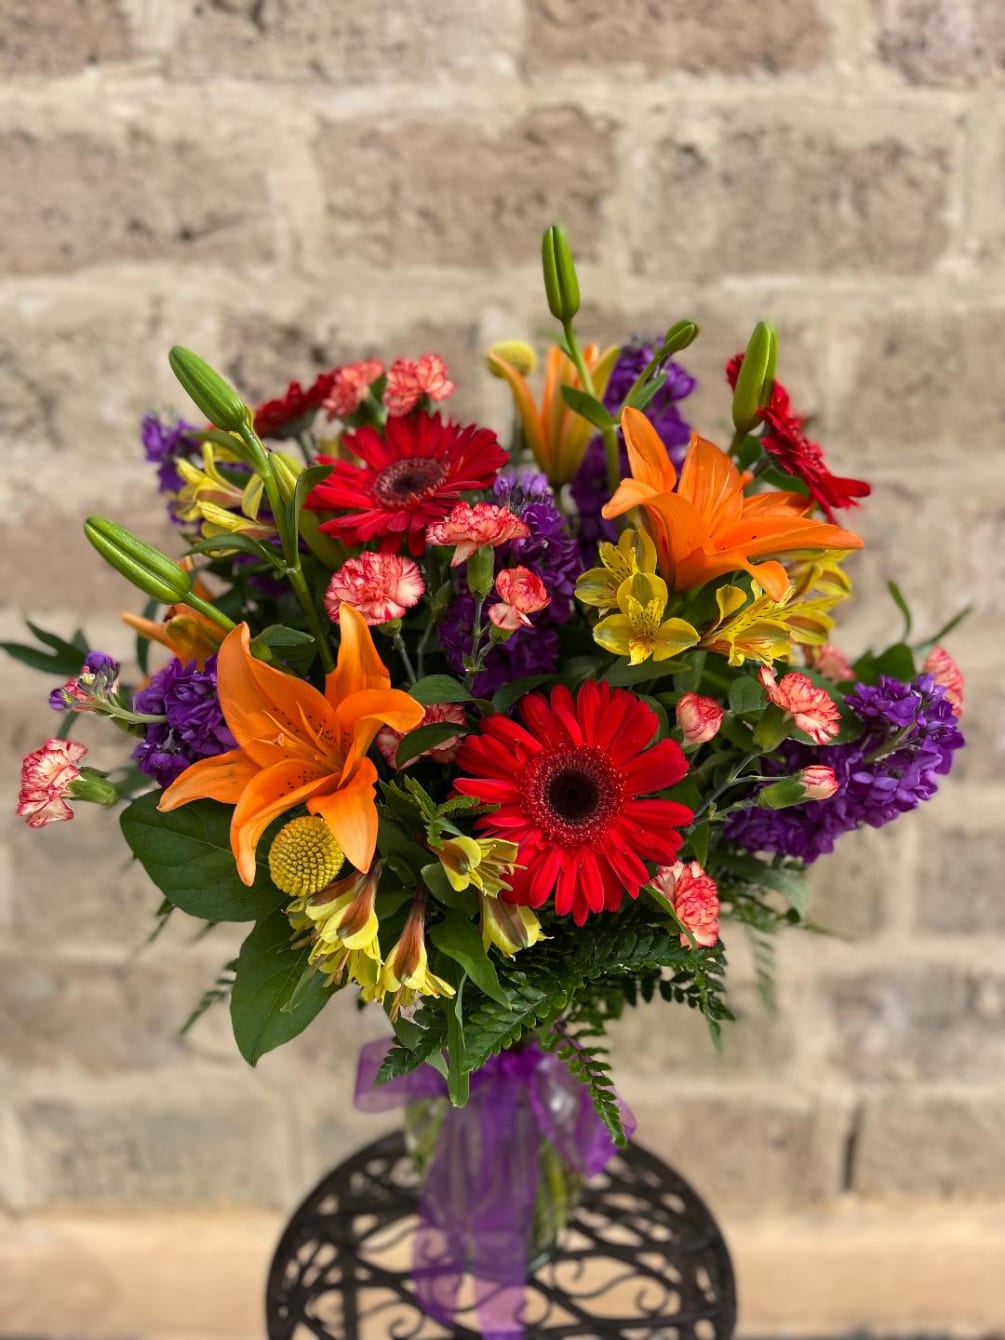 An exquisite and colorful floral arrangement very summery